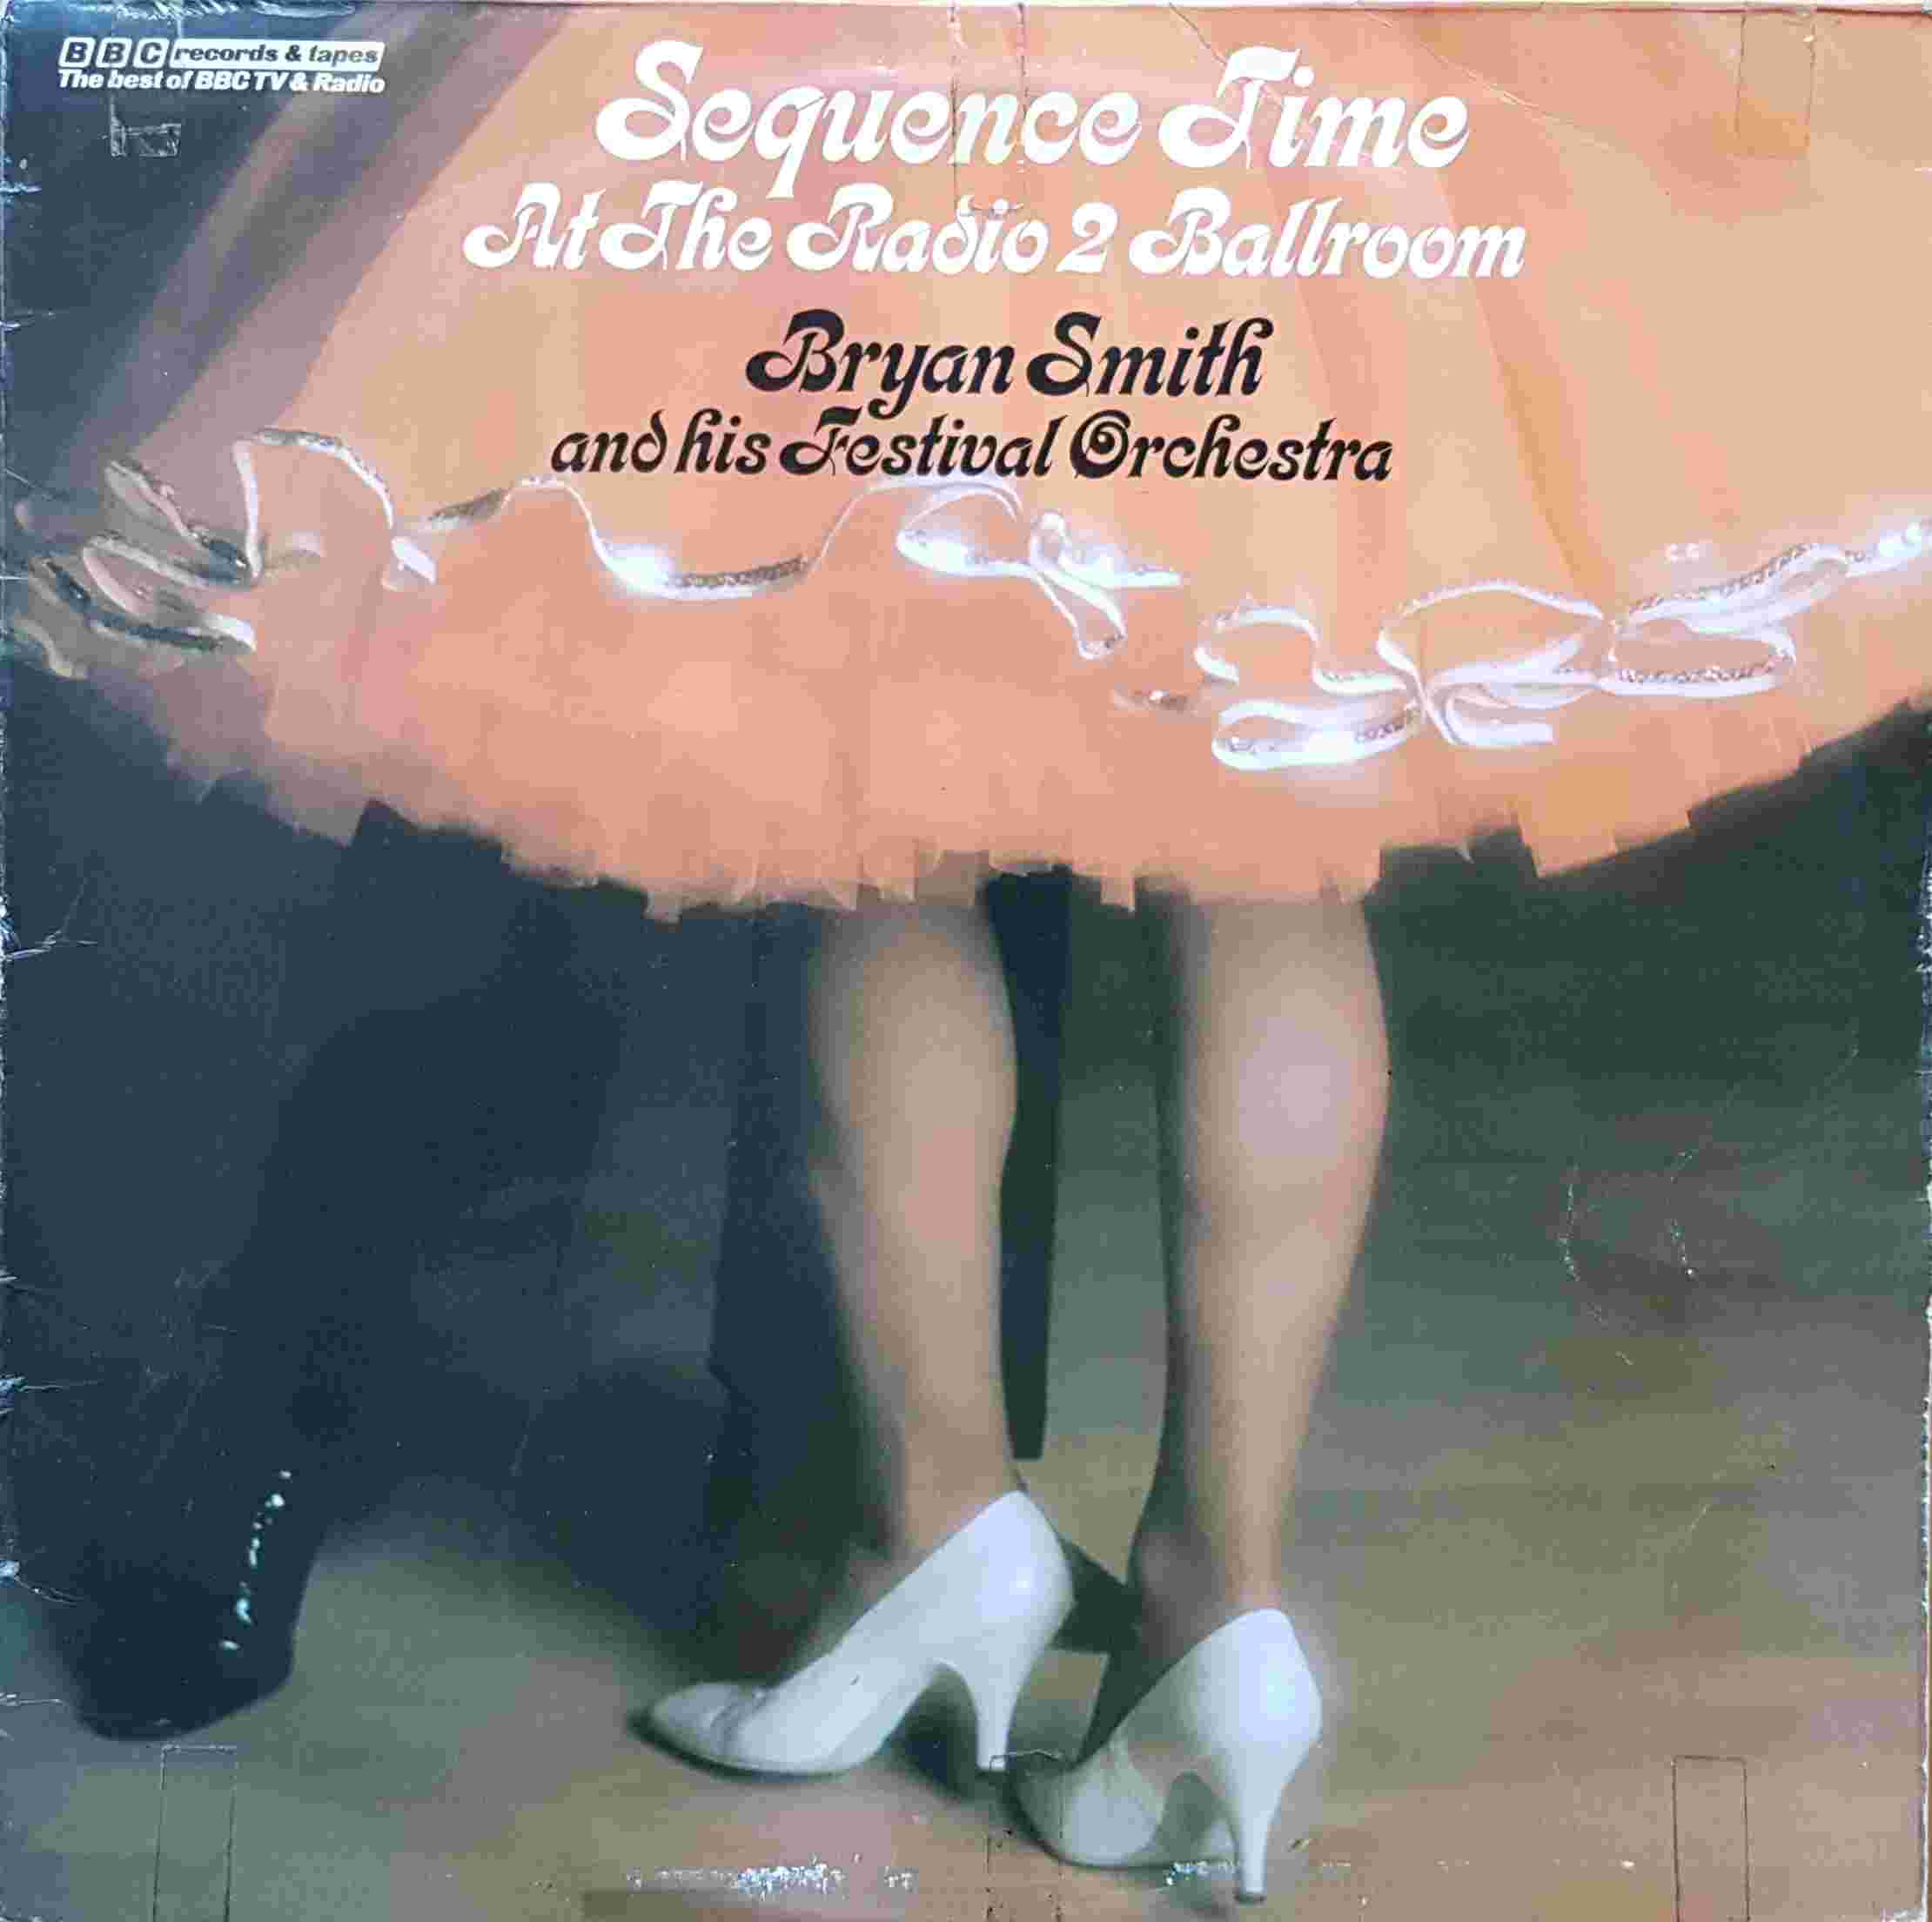 Picture of REC 285 Sequence time at the Radio 2 ballroom by artist Various from the BBC albums - Records and Tapes library